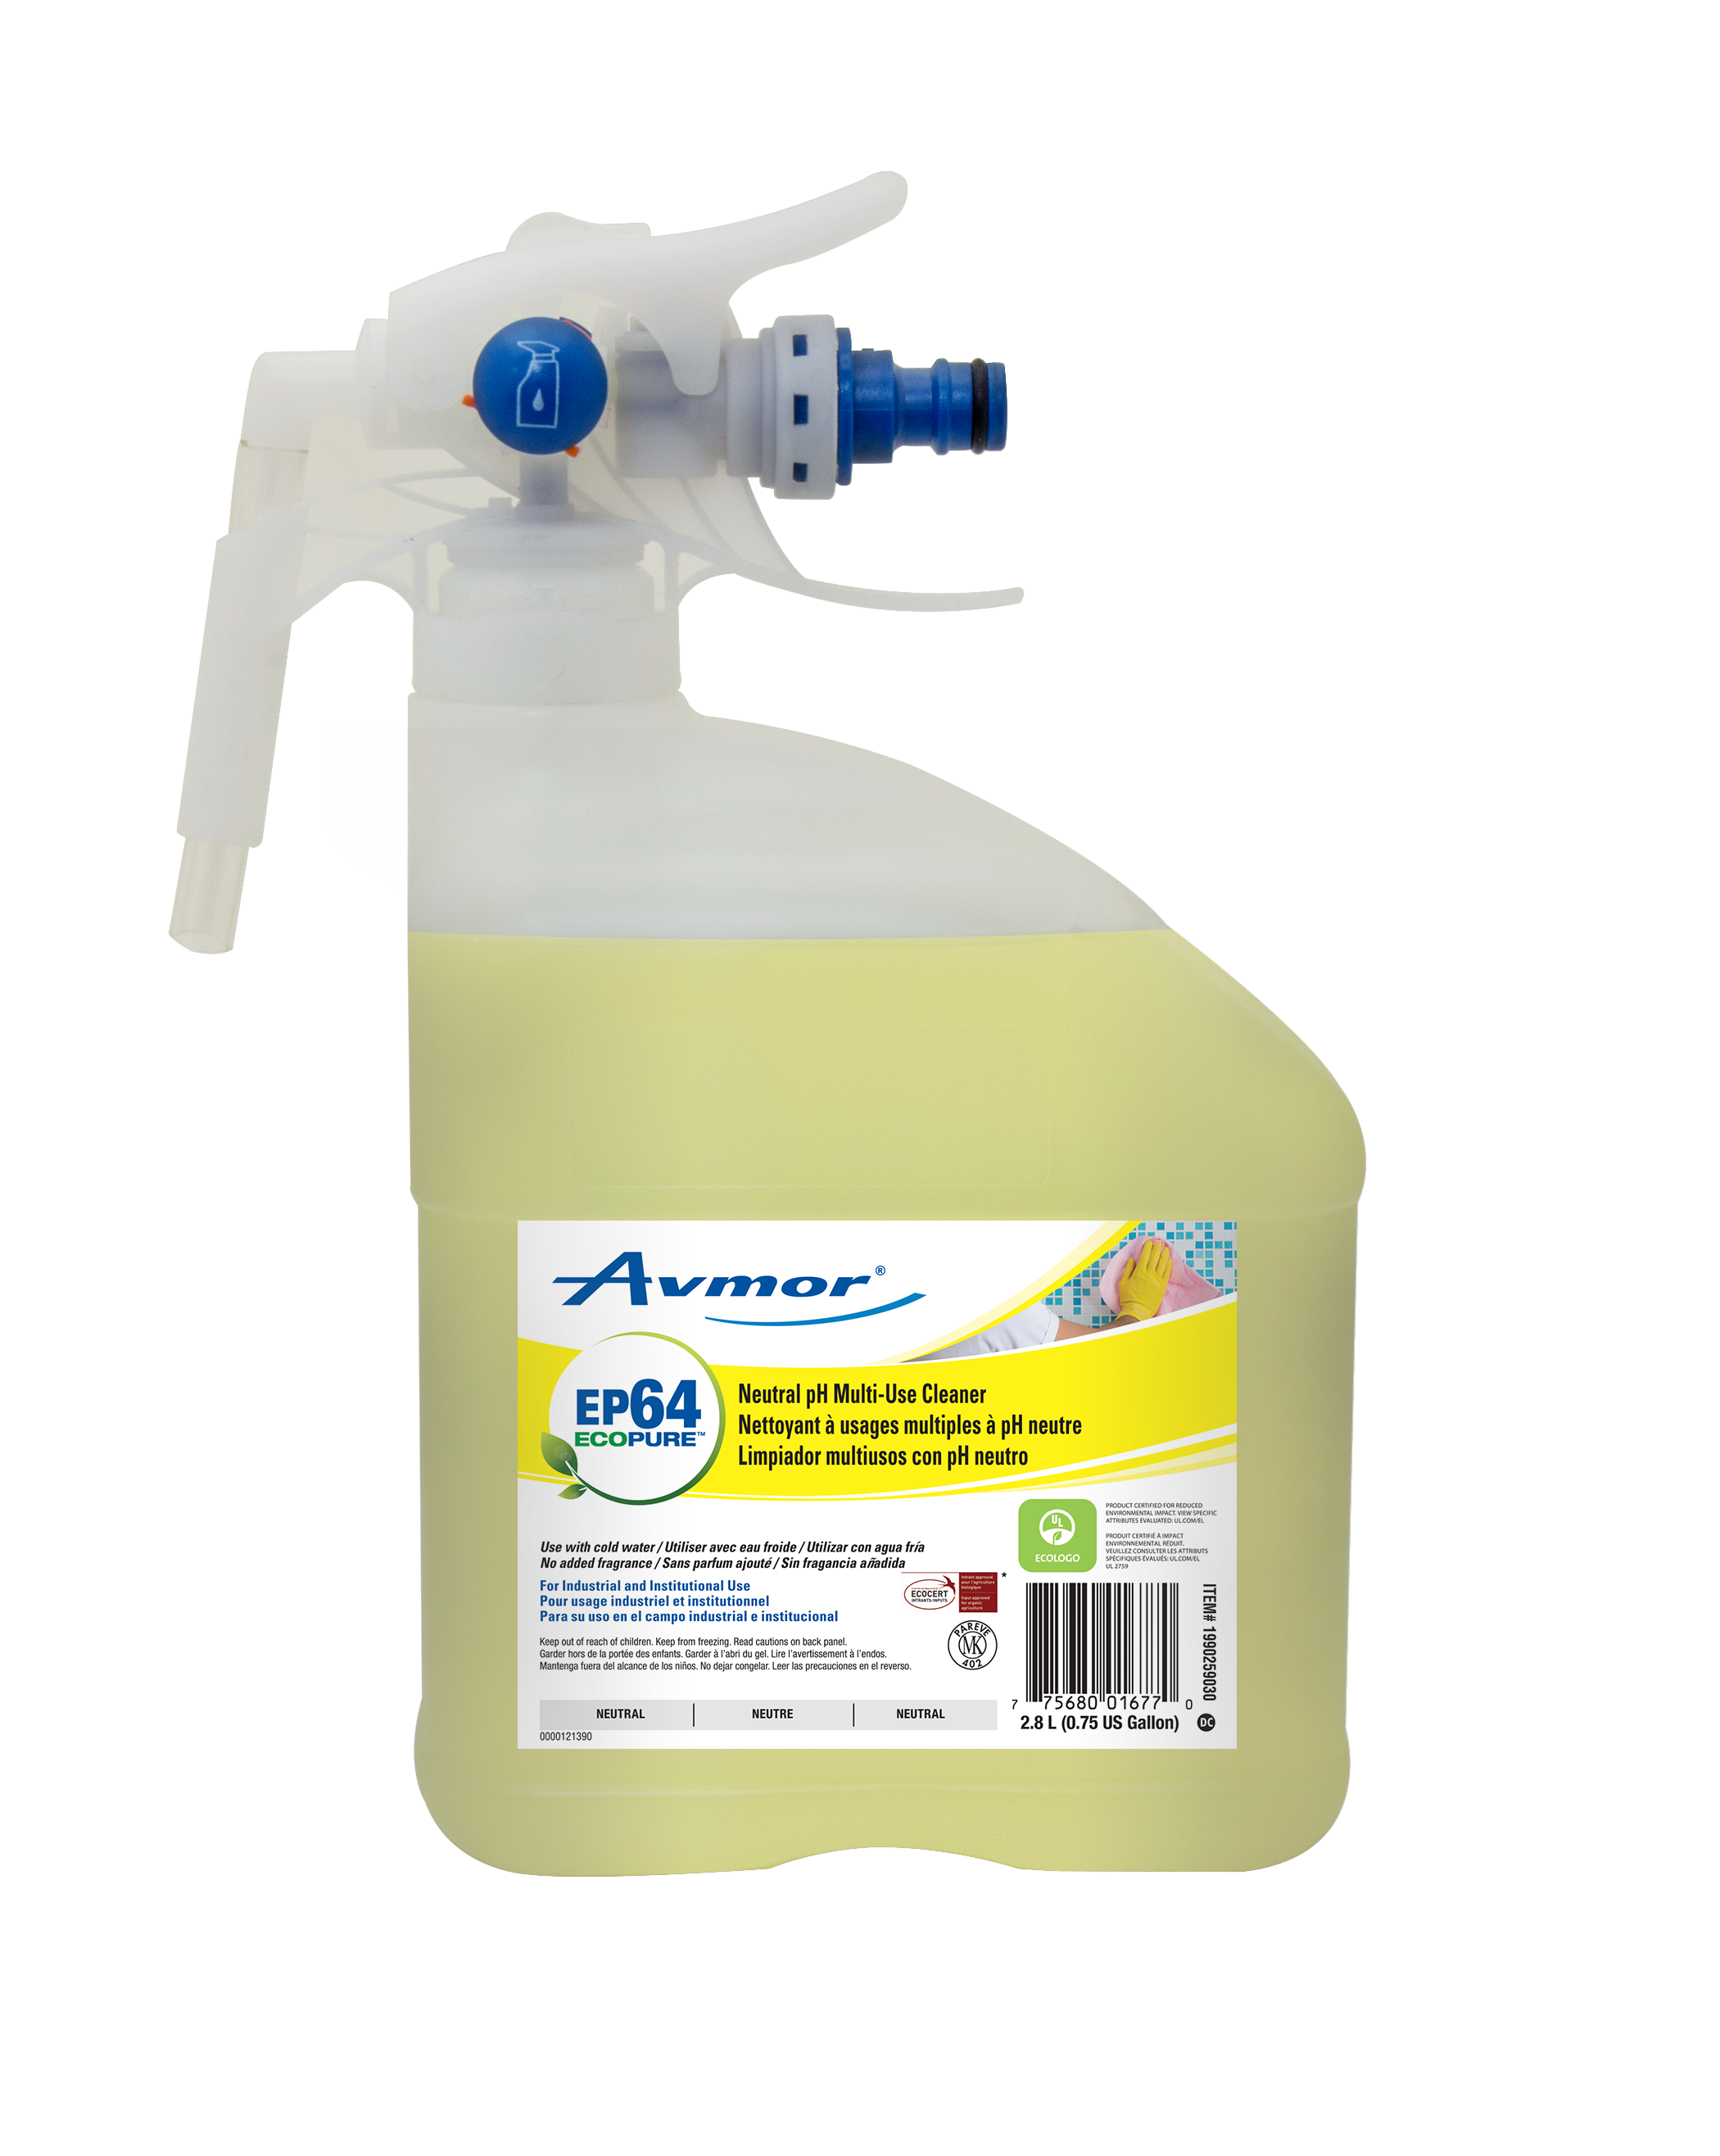 EP64 Neutral pH Multi-Use Cleaner